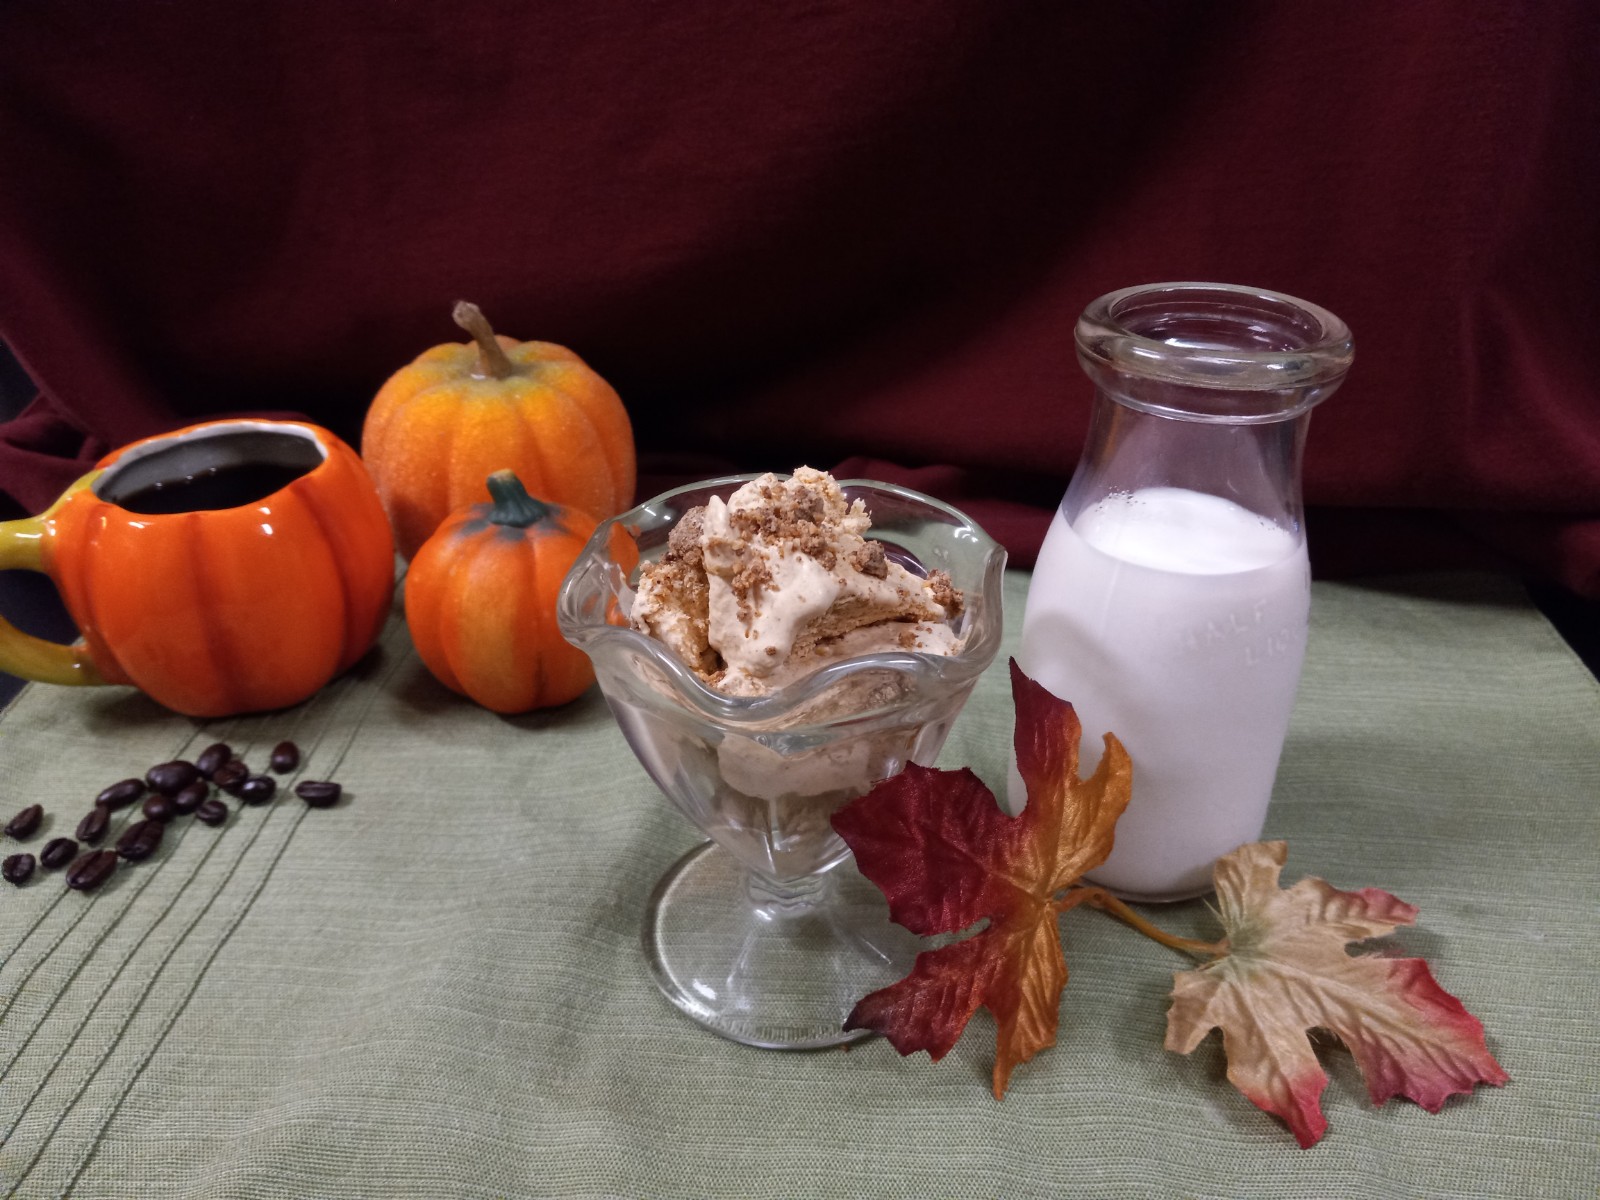 decorative pumpkins, one mug style containing coffee and coffee beans scattered in front, a glass ice cream dish with pumpkin latte ice cream and gingersnap crumbs beside an antique cream container full of milk with fall leaves in front on a green placemat with a burgundy background